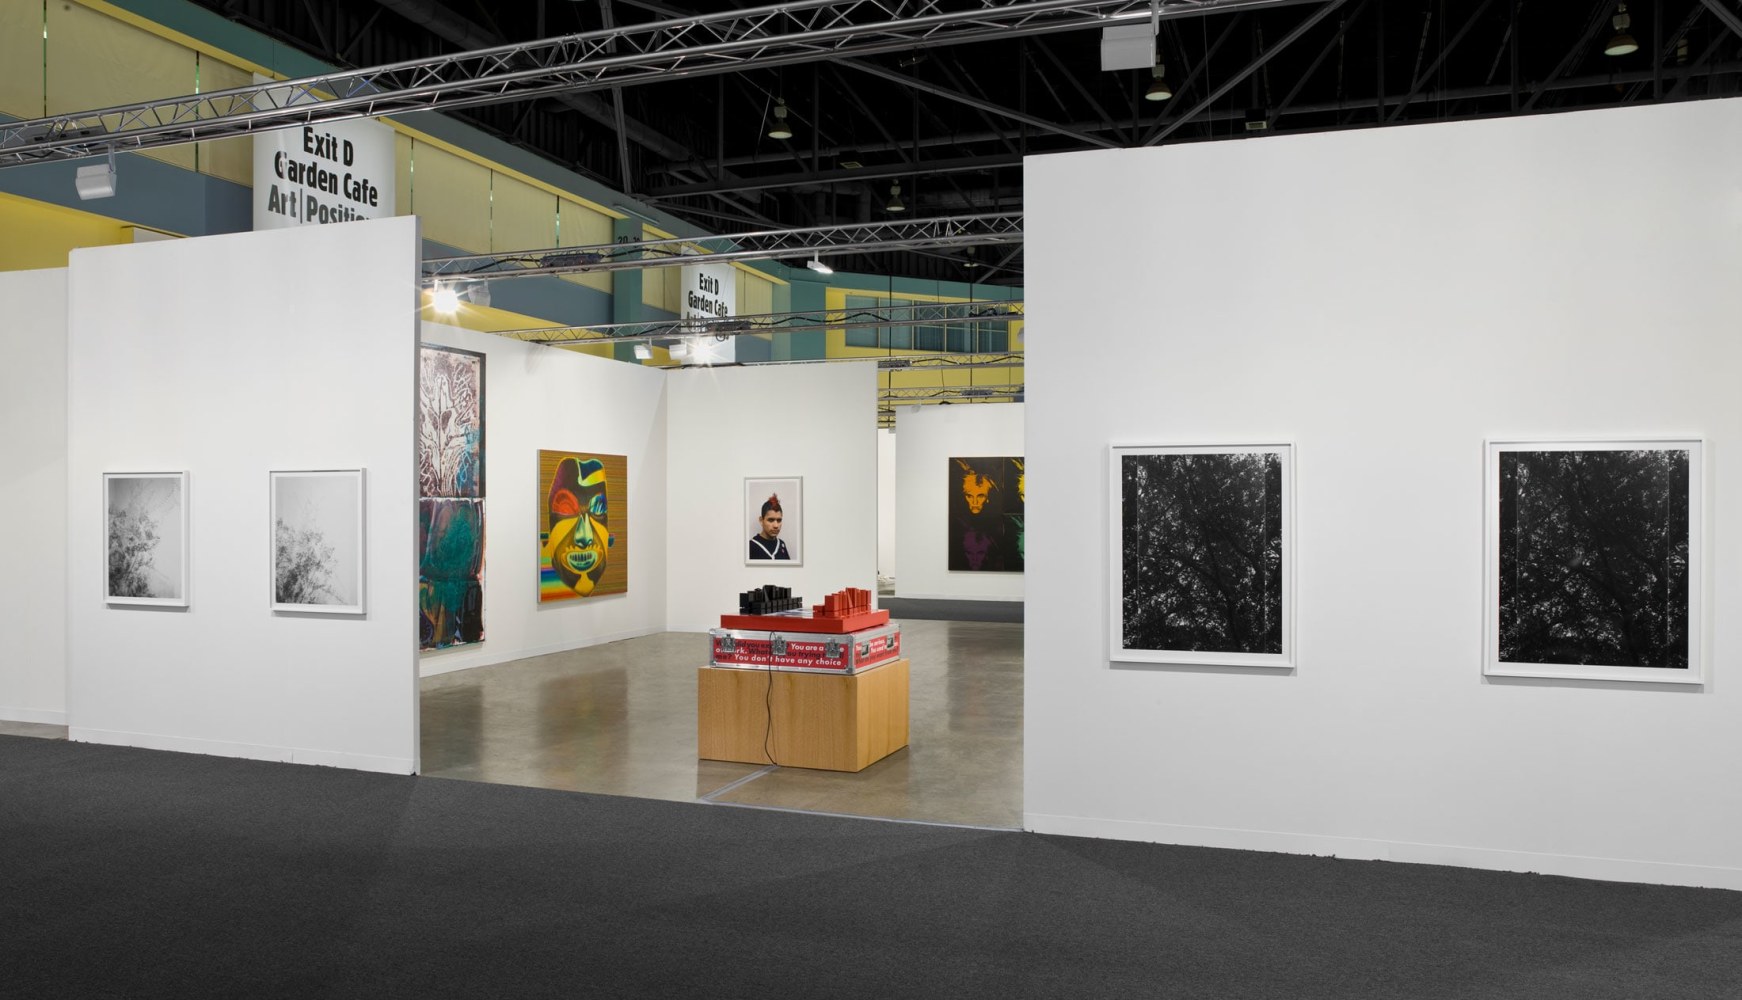 Luhring Augustine
Art Basel Miami Beach
Installation view
​2010